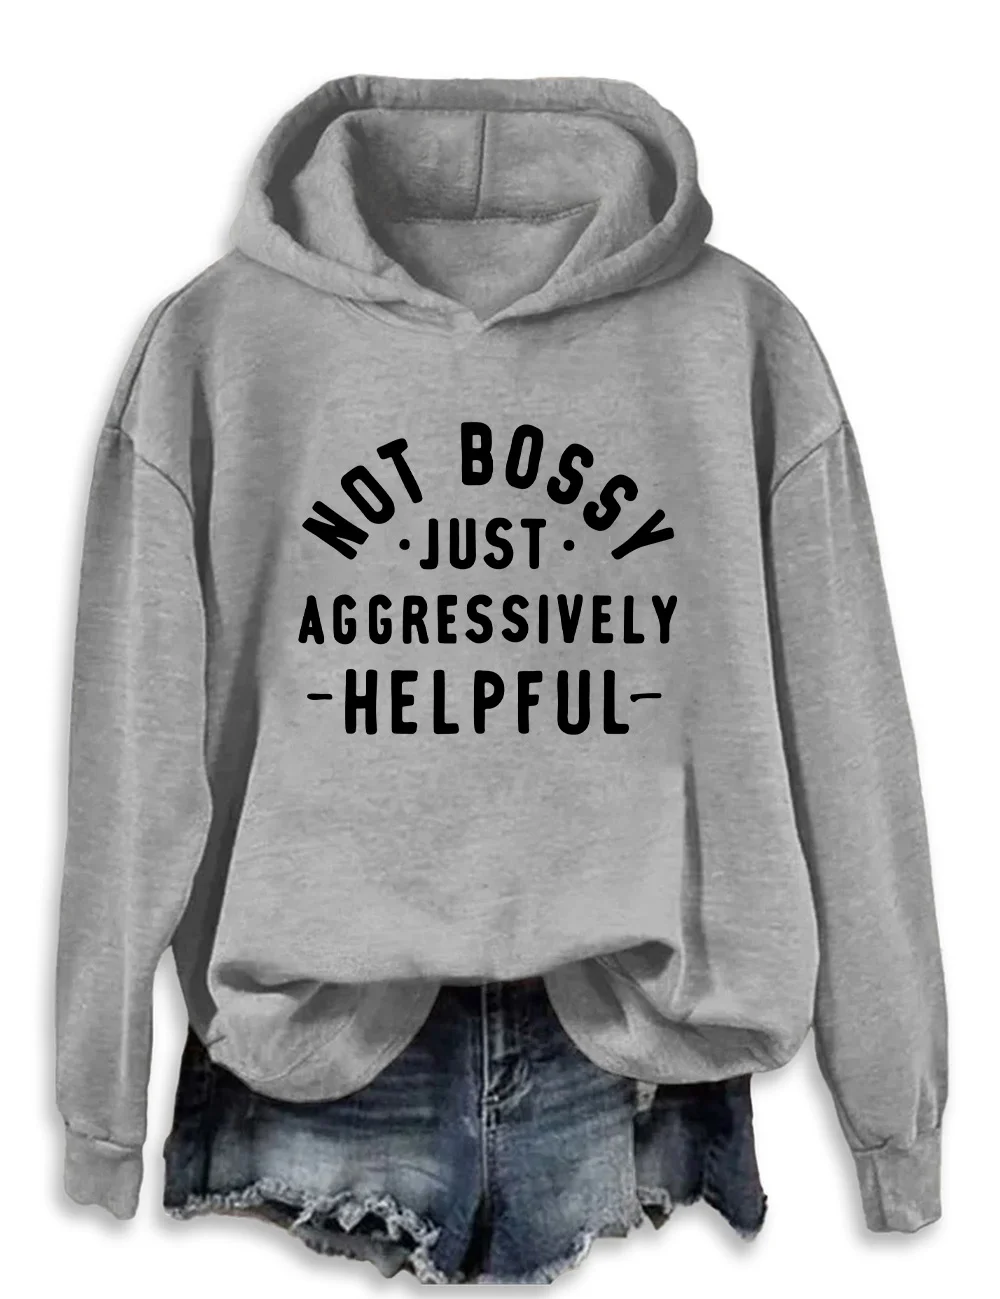  Not Bossy Just Aggressively Helpful Hoodie